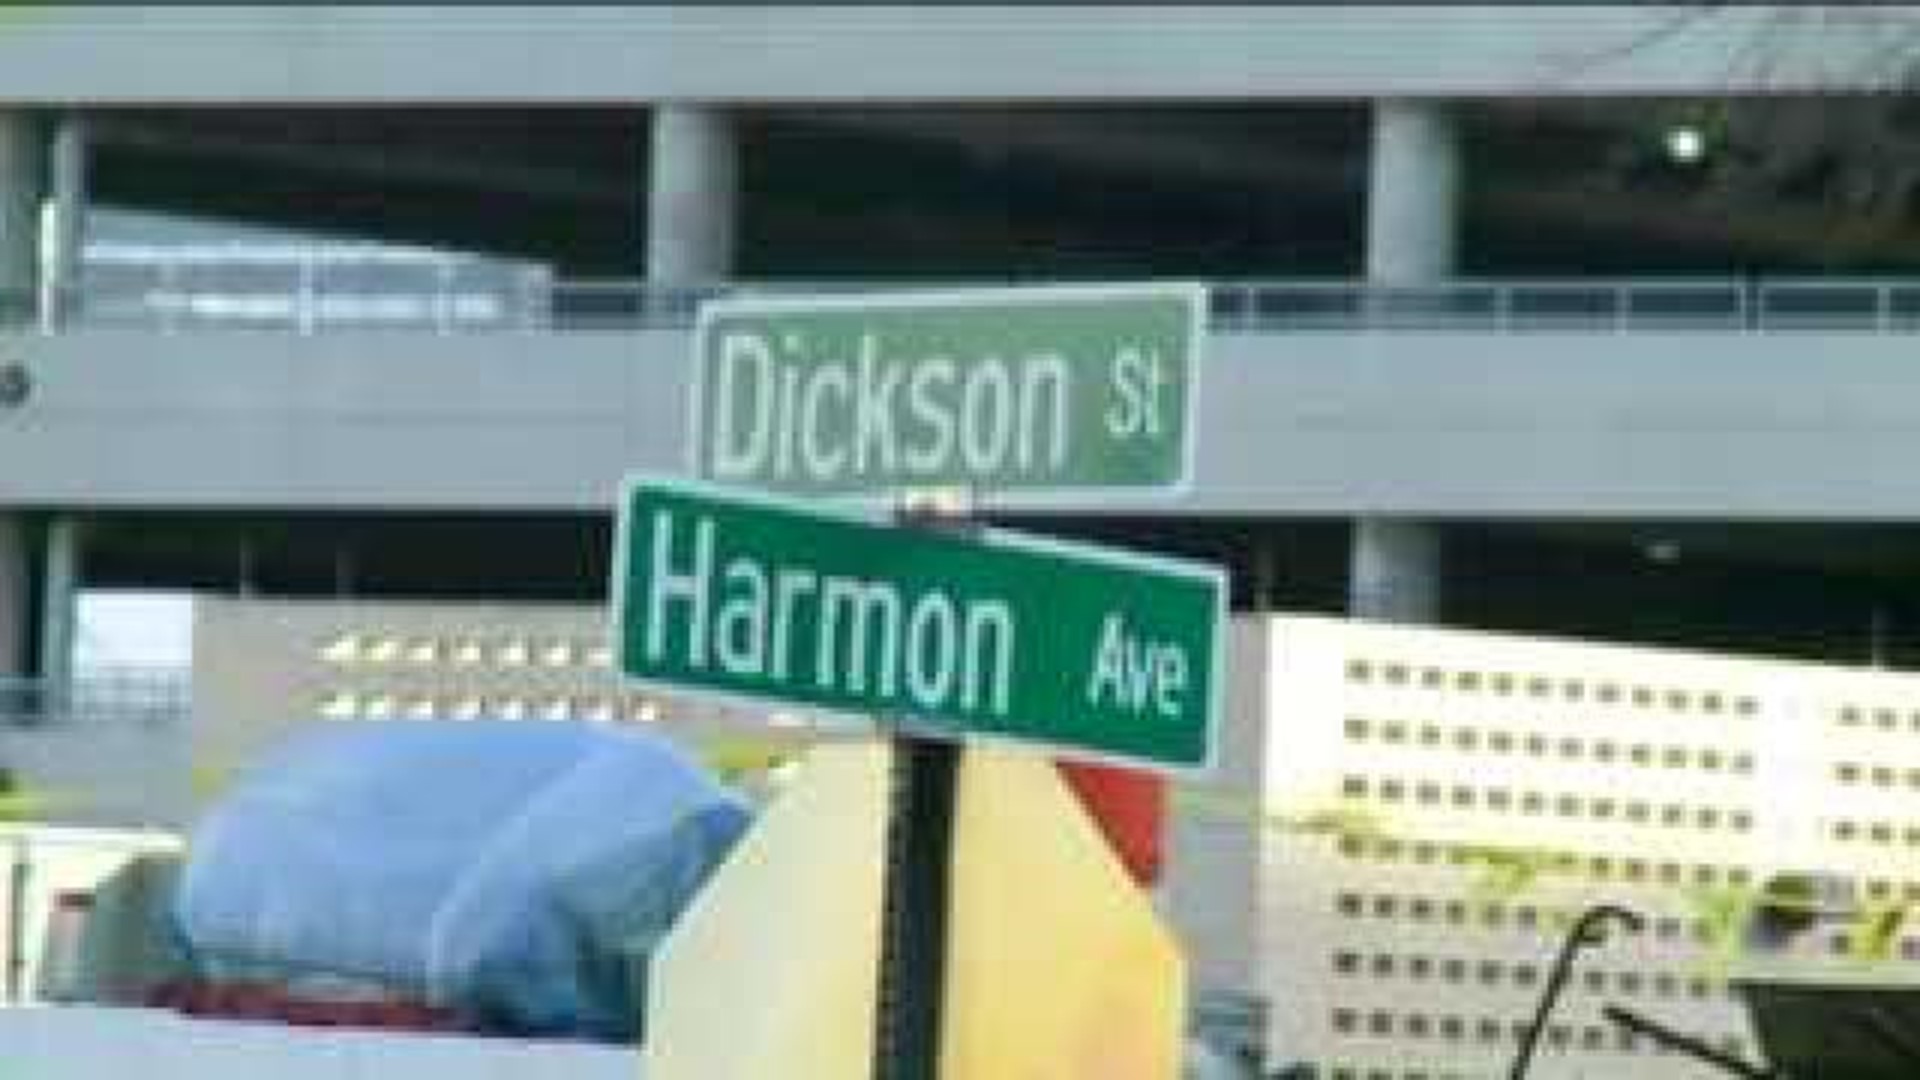 Starting Monday: Portions of Dickson to be Blocked Off